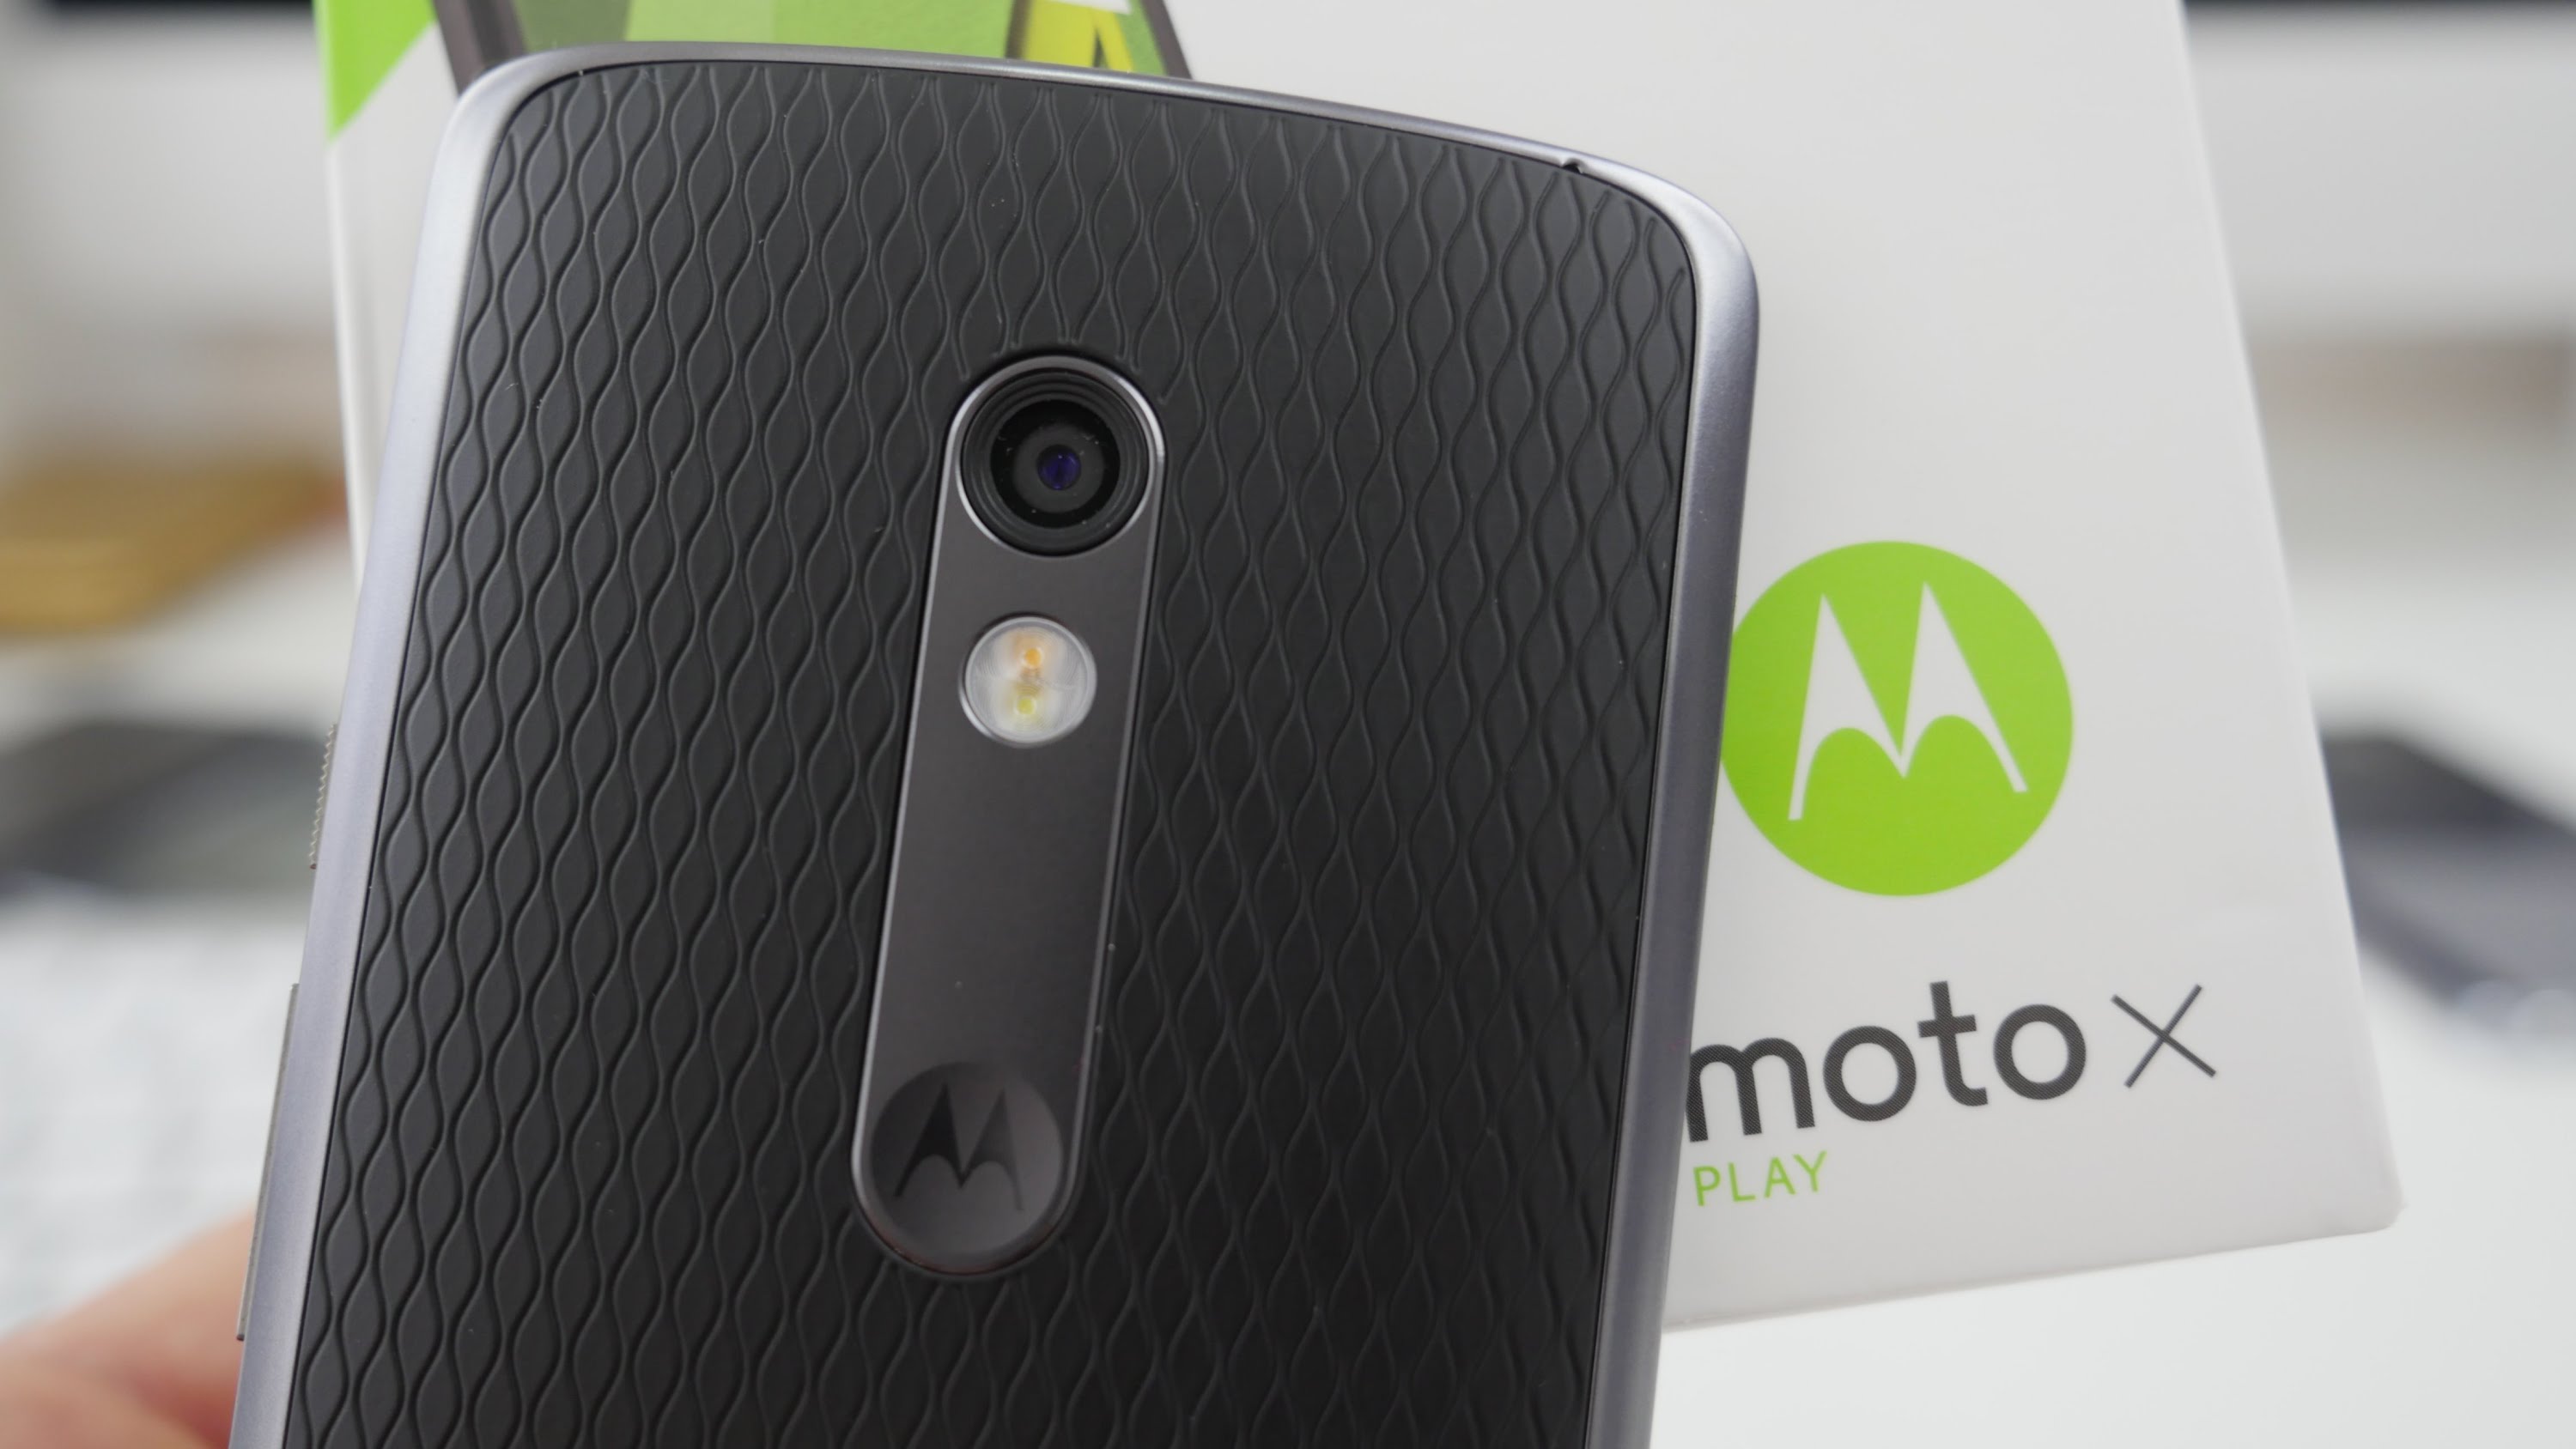 moto x play to receive android nougat update soon, says motorola